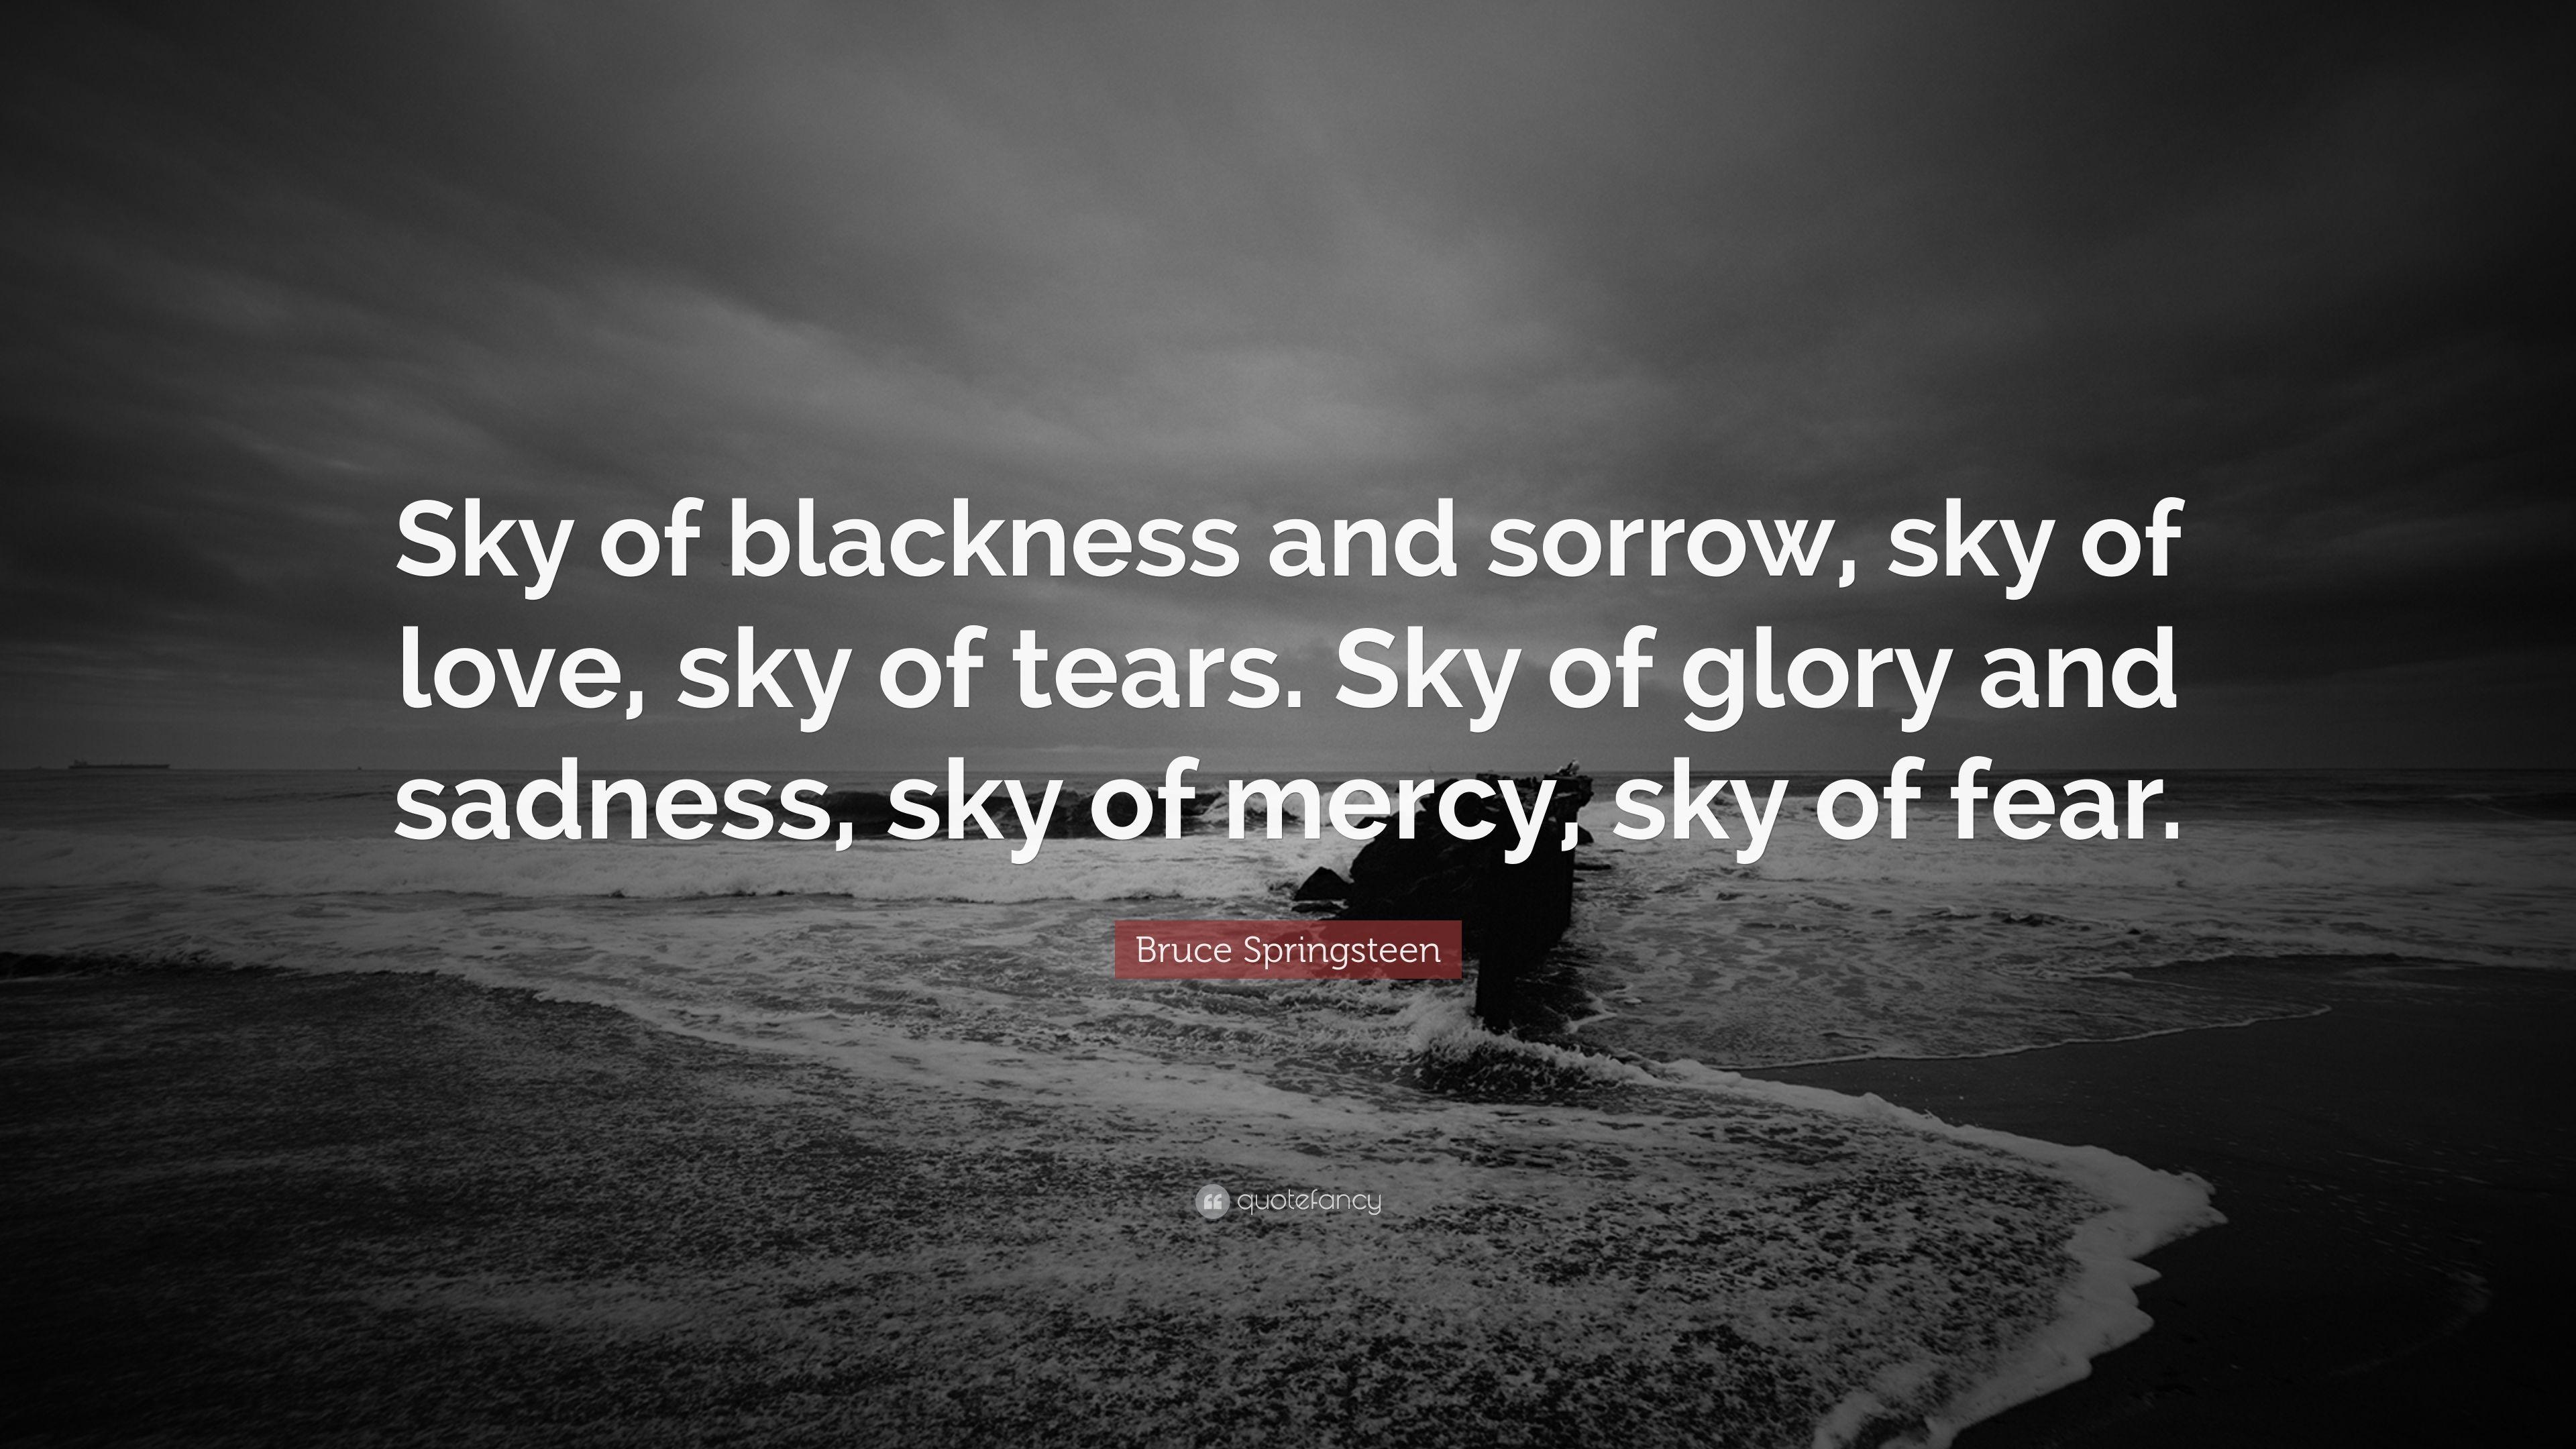 Bruce Springsteen Quote: “Sky of blackness and sorrow, sky of love